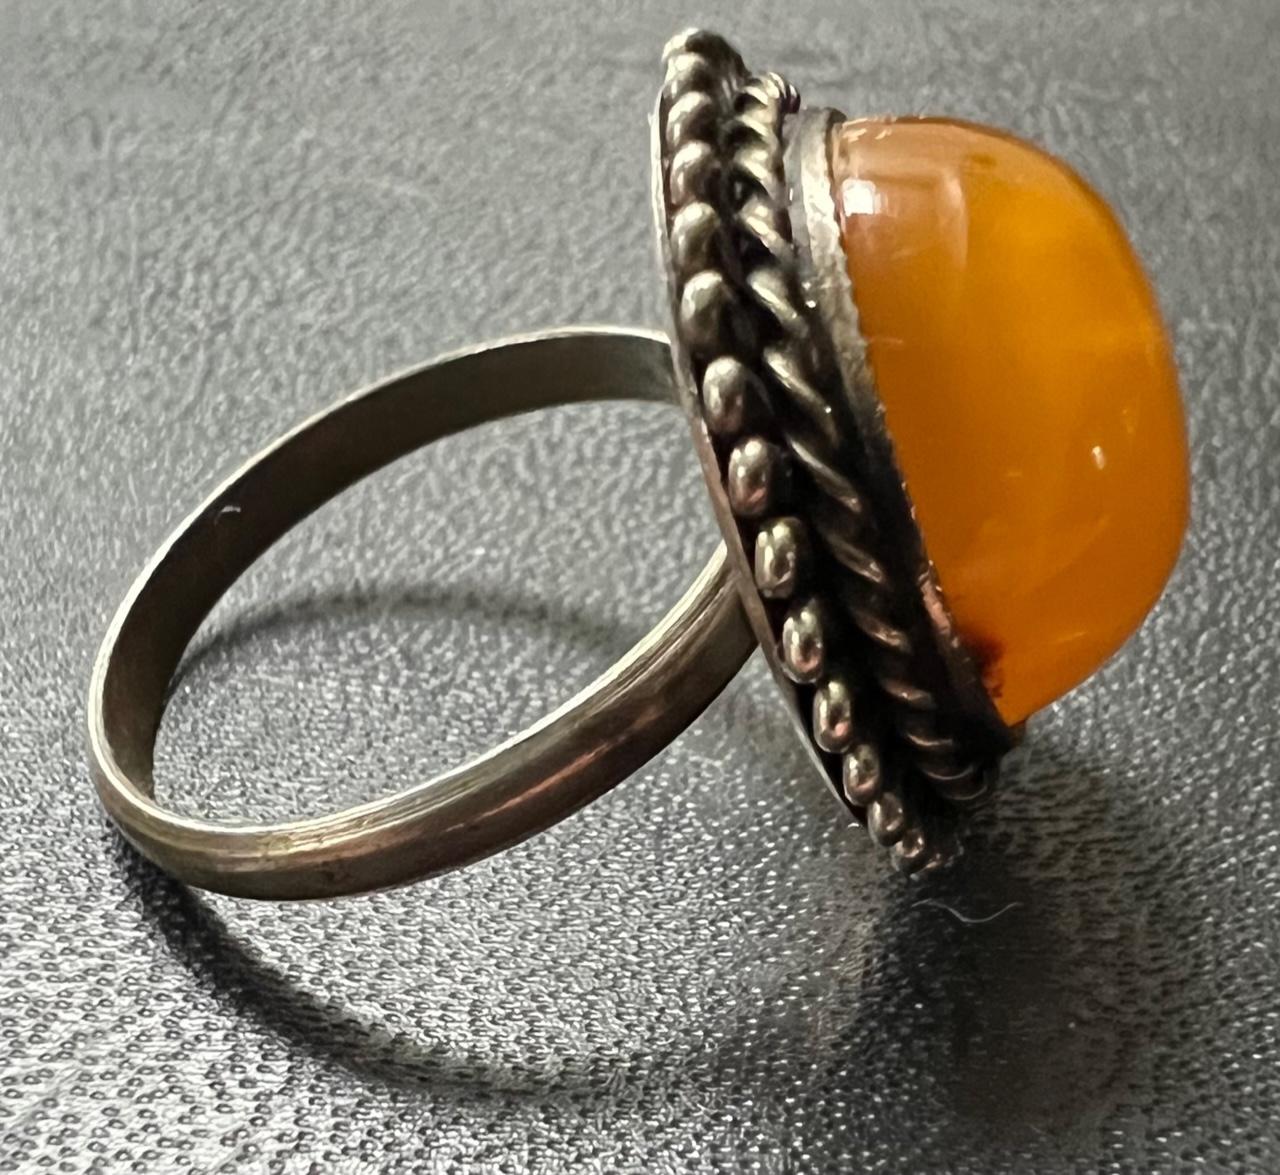 latvian ring with dangles